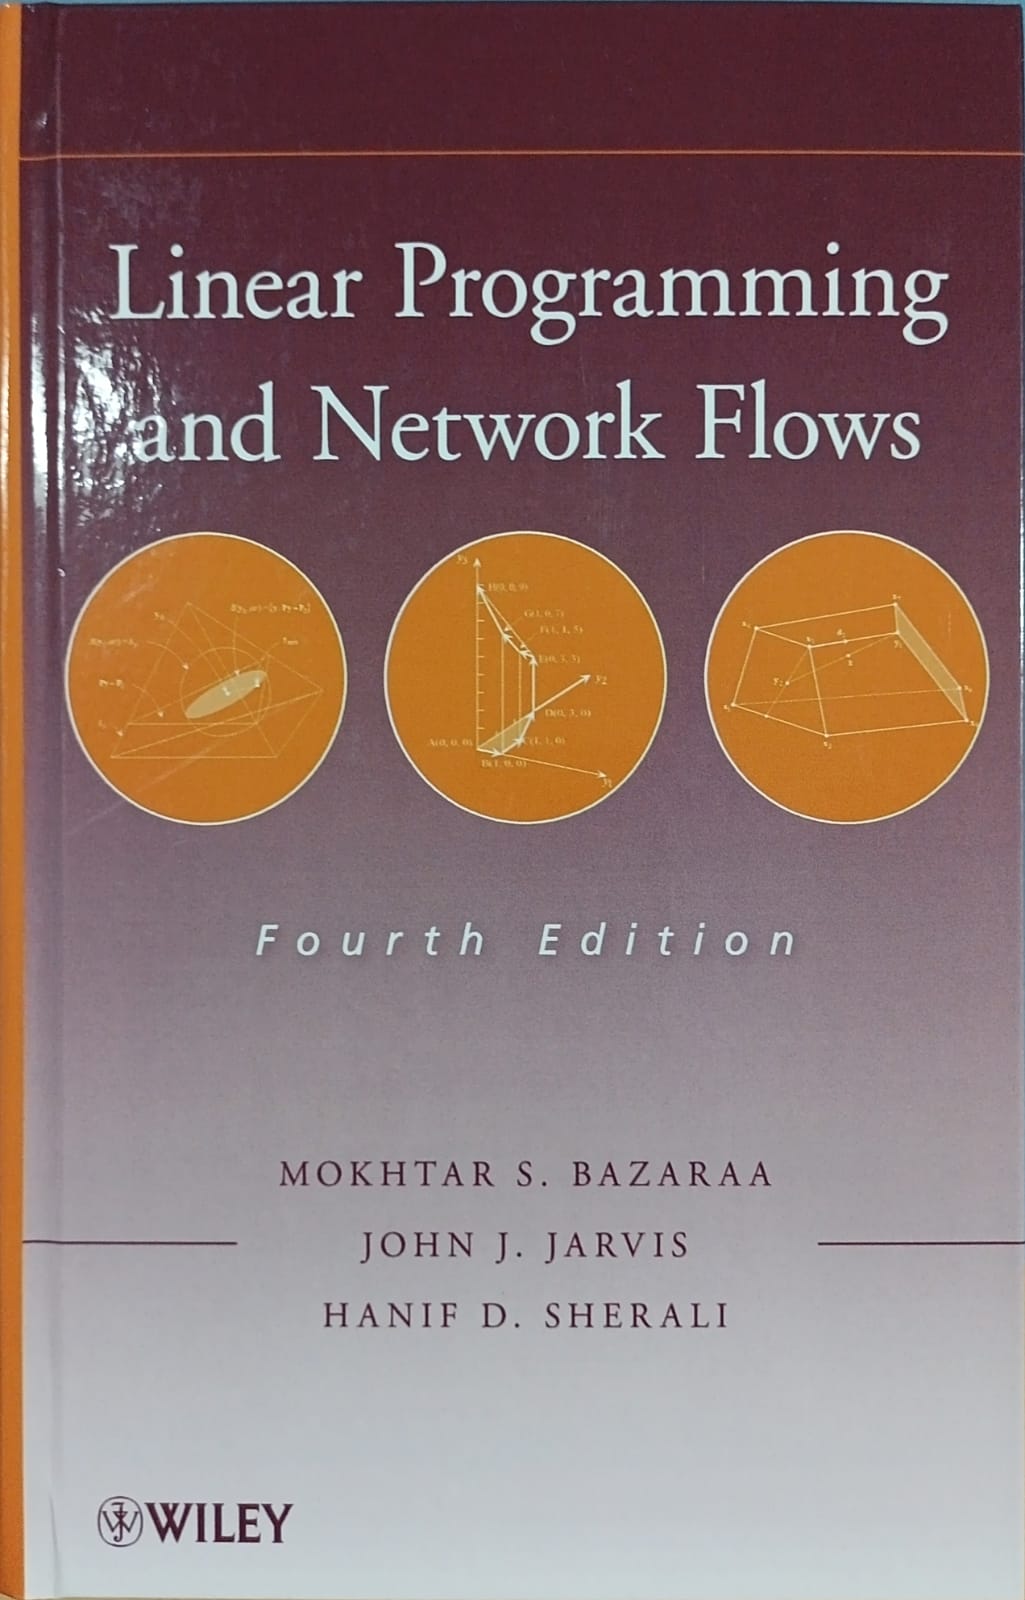 Linear programming and network flows 4th edition